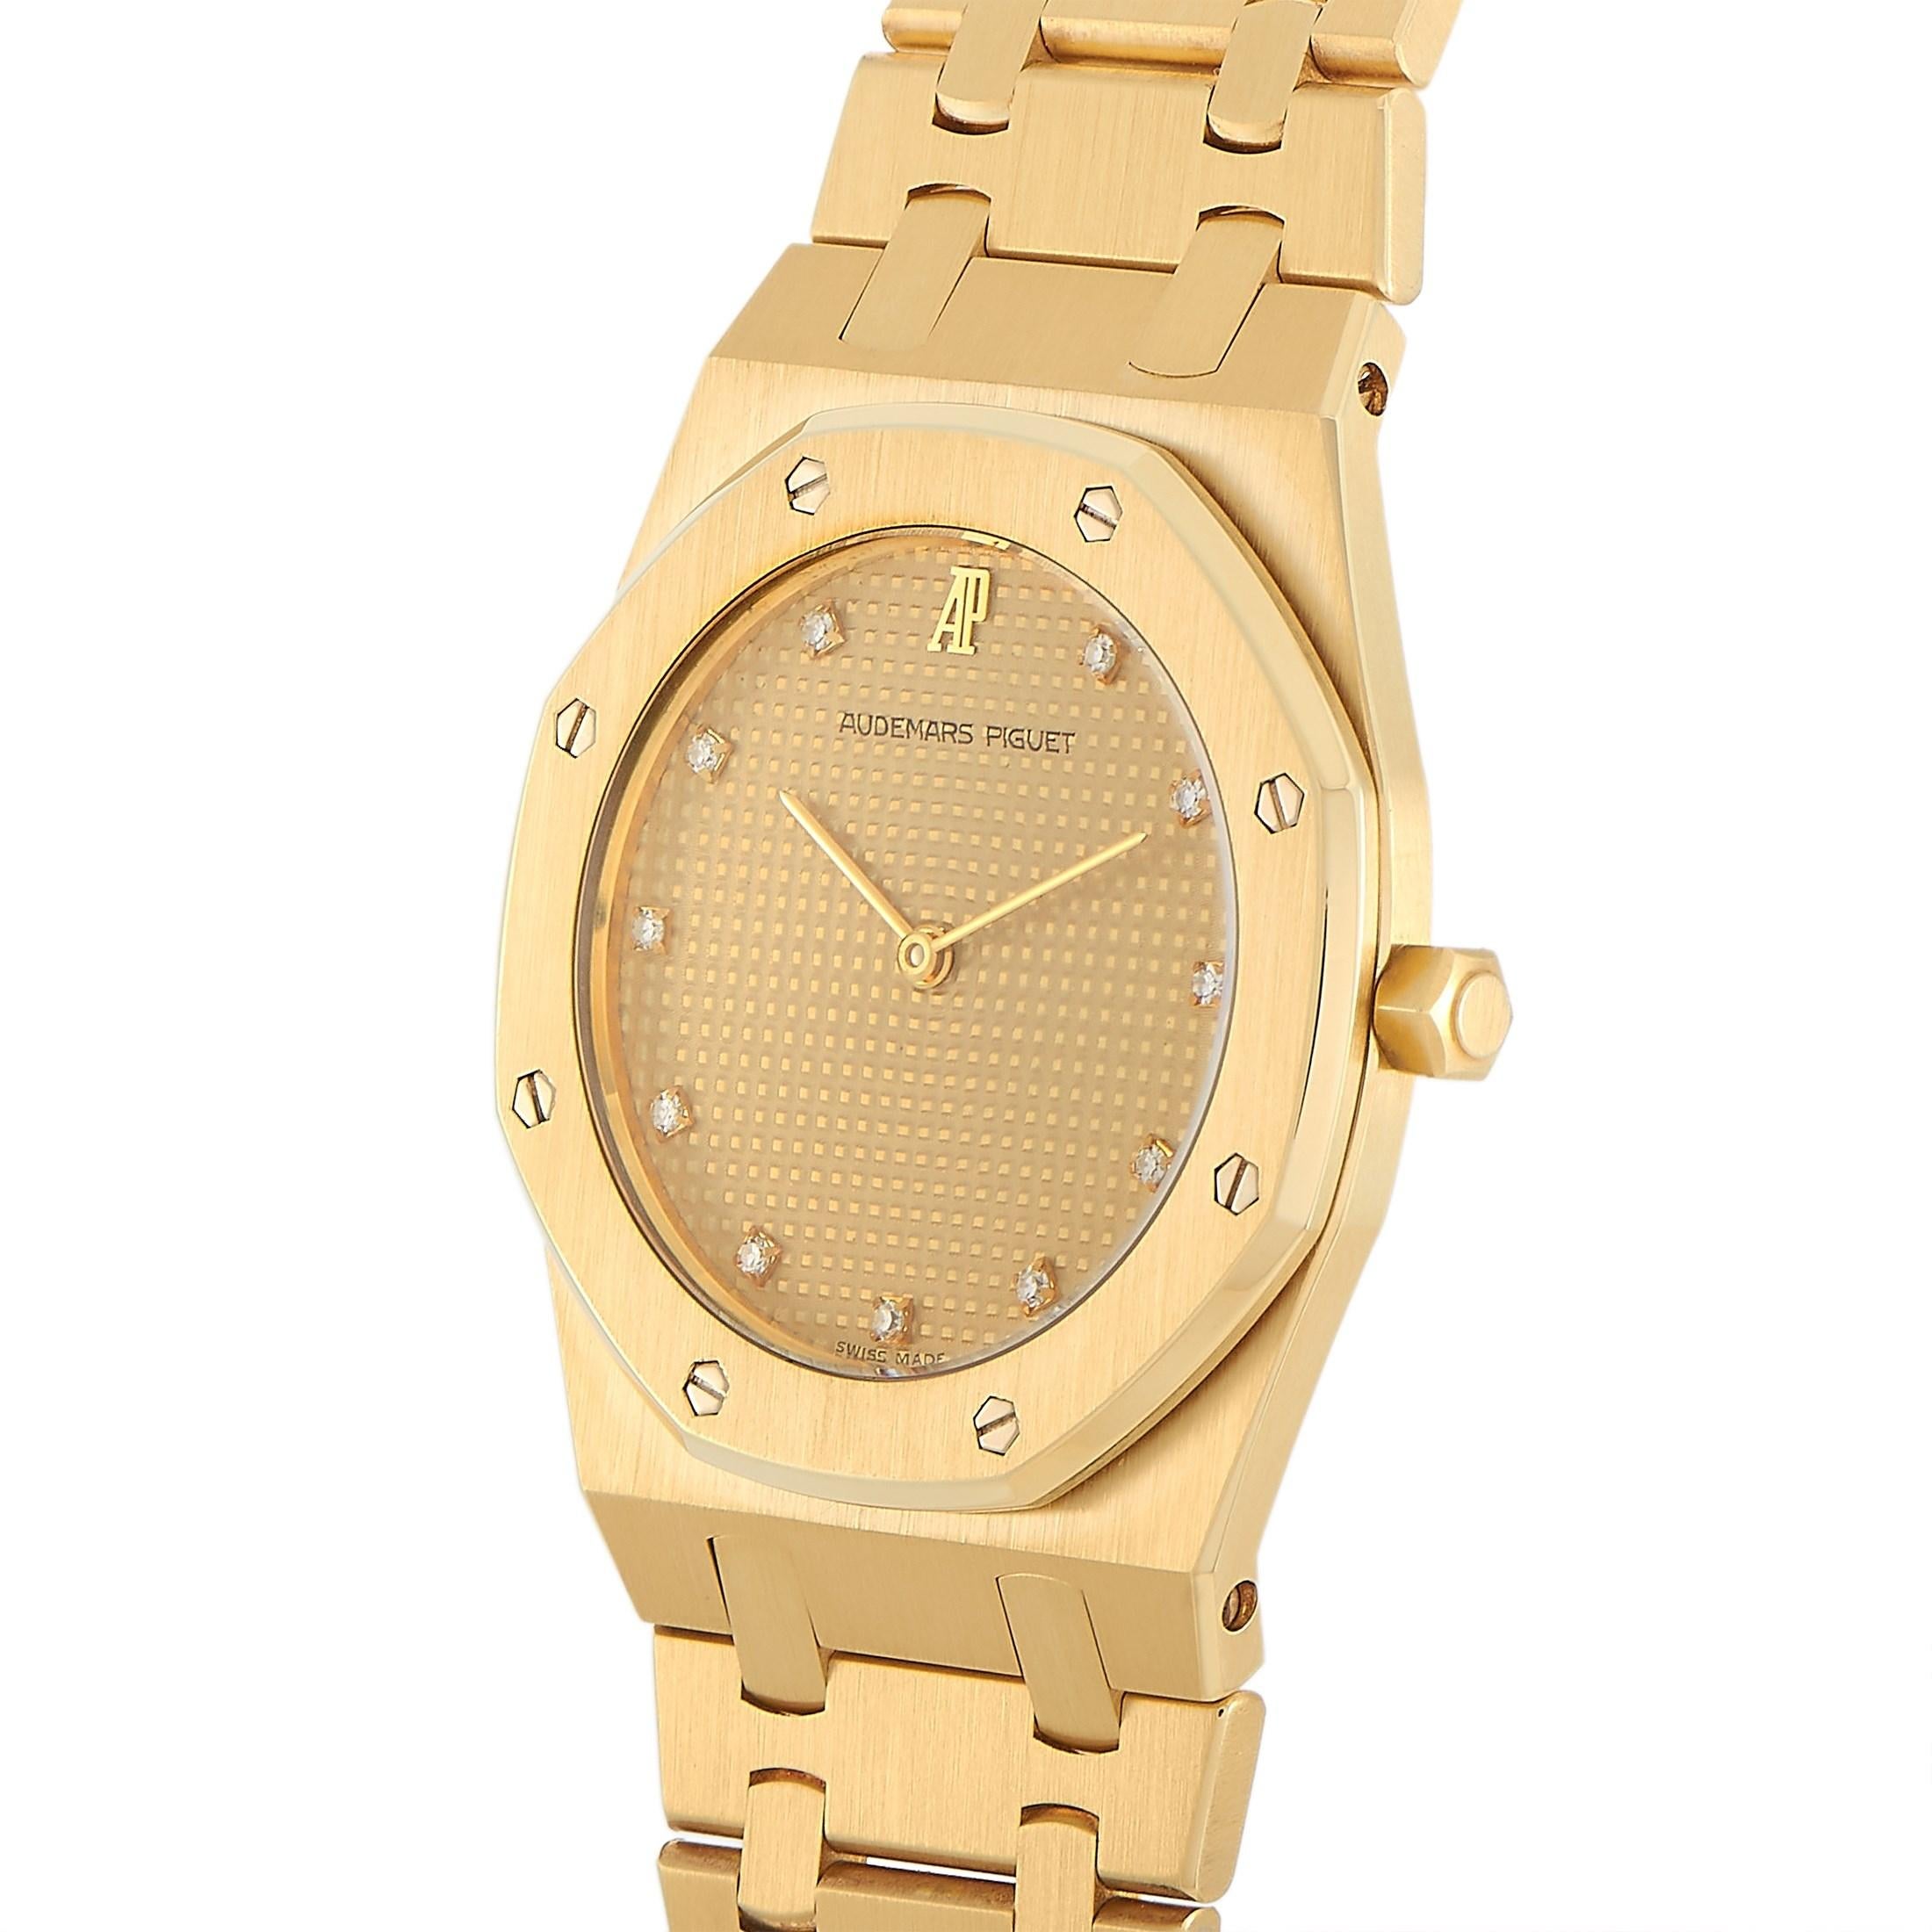 Audemars Piguet Royal Oak 18K yellow gold watch is a part of the Royal Oak collection. The watch comes with an 18K yellow gold case measuring 33 mm in diameter and boasts a fixed 18K yellow gold bezel adorned with 8 iconic Audemars Piguet screws.